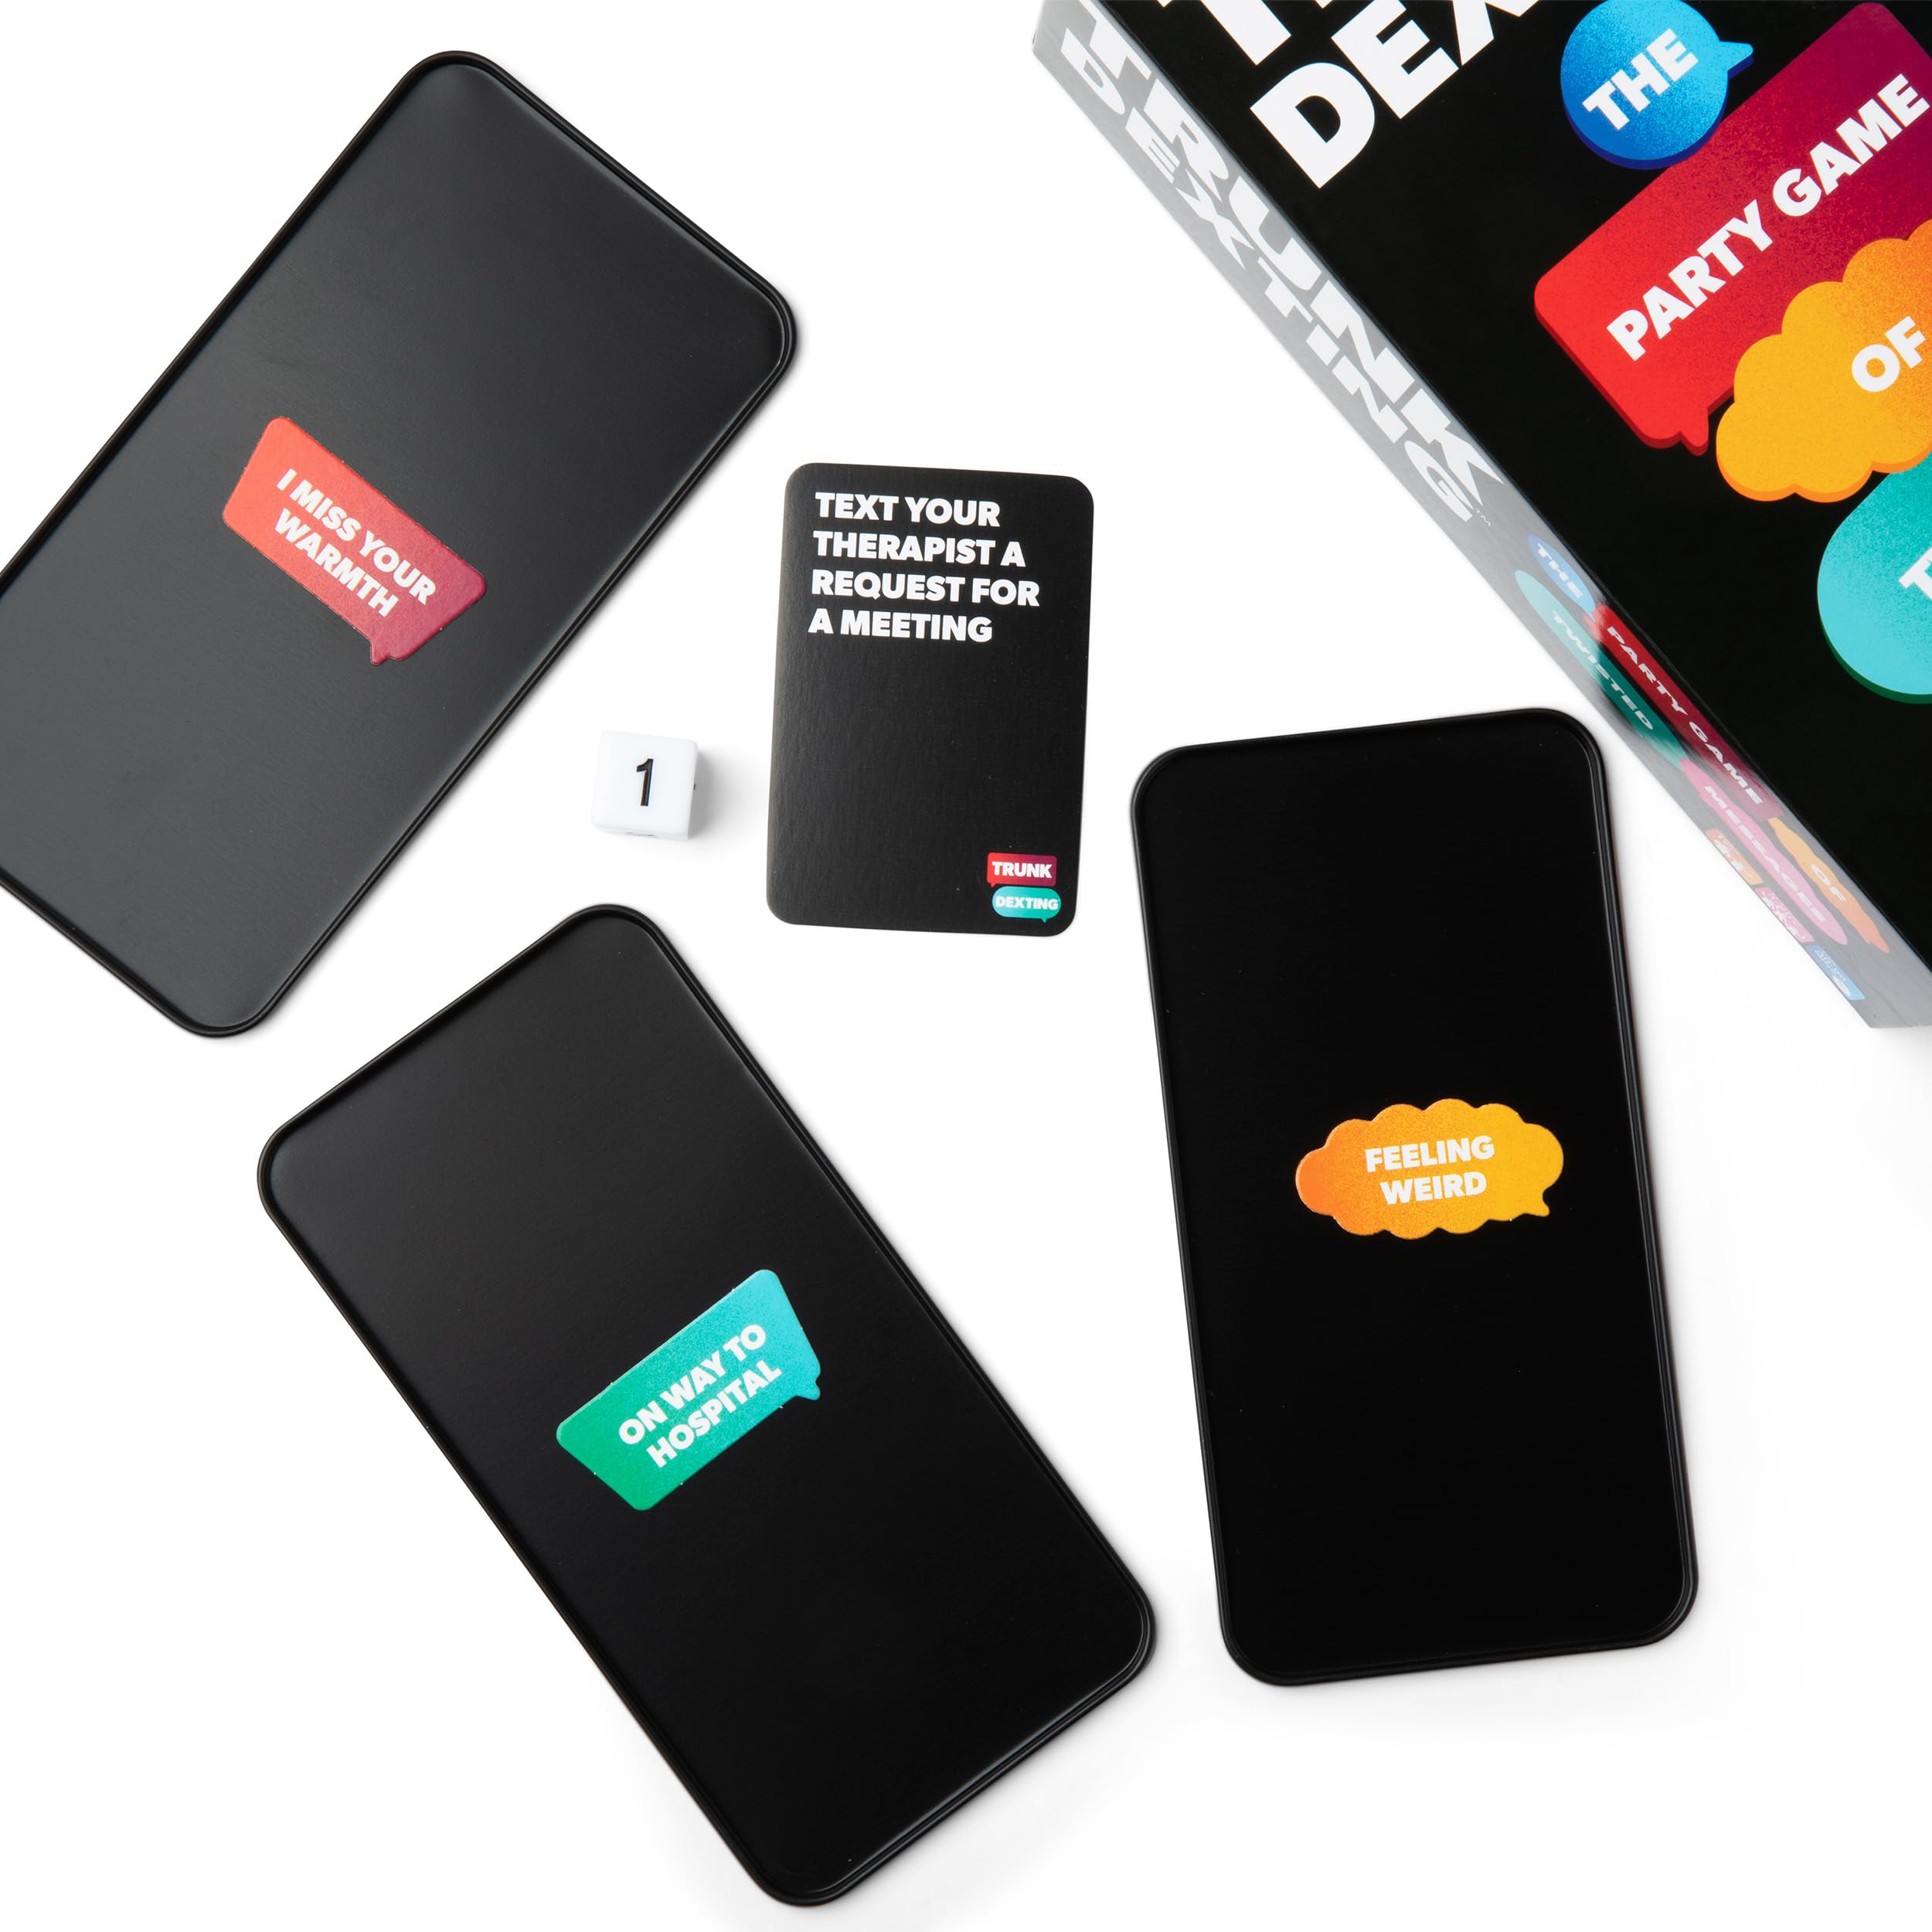 WHAT DO YOU MEME? Trunk Dexting — Word Games, Magnet Games for Adults from The Makers of New Phone Who Dis Game